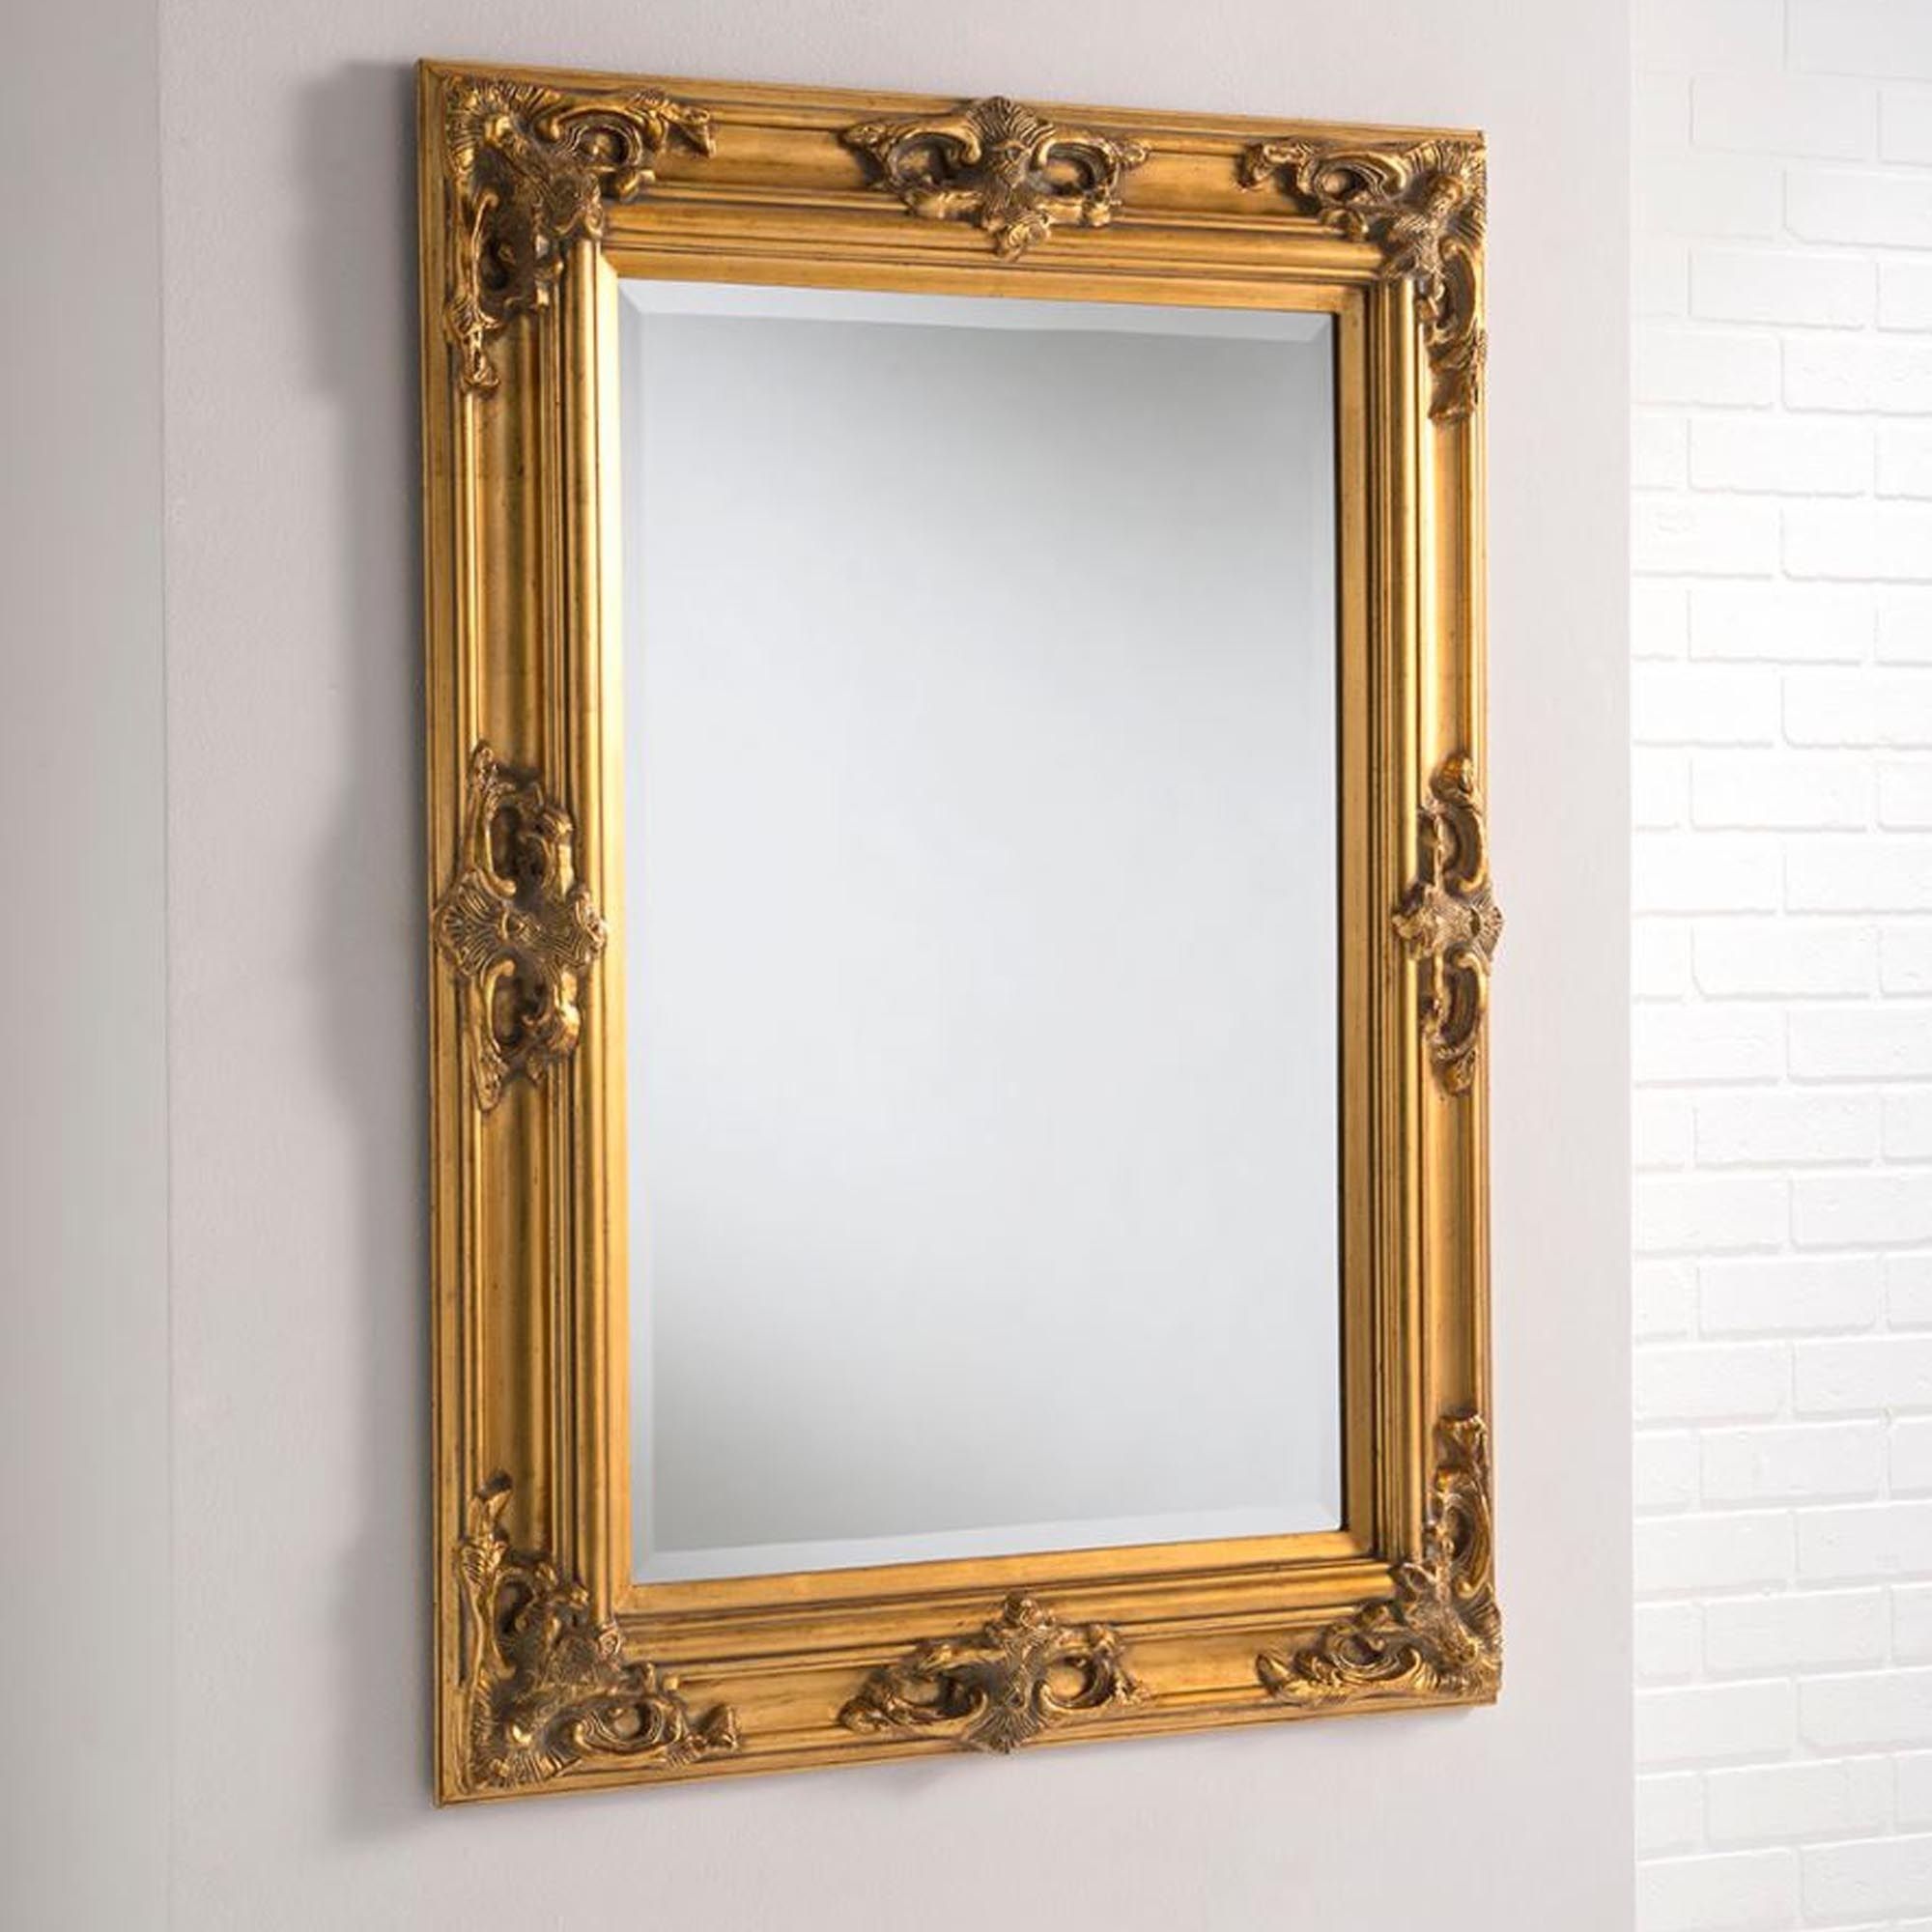 Tuscany Antique French Style Gold Wall Mirror | Homesdirect365 Intended For Antiqued Glass Wall Mirrors (View 4 of 15)